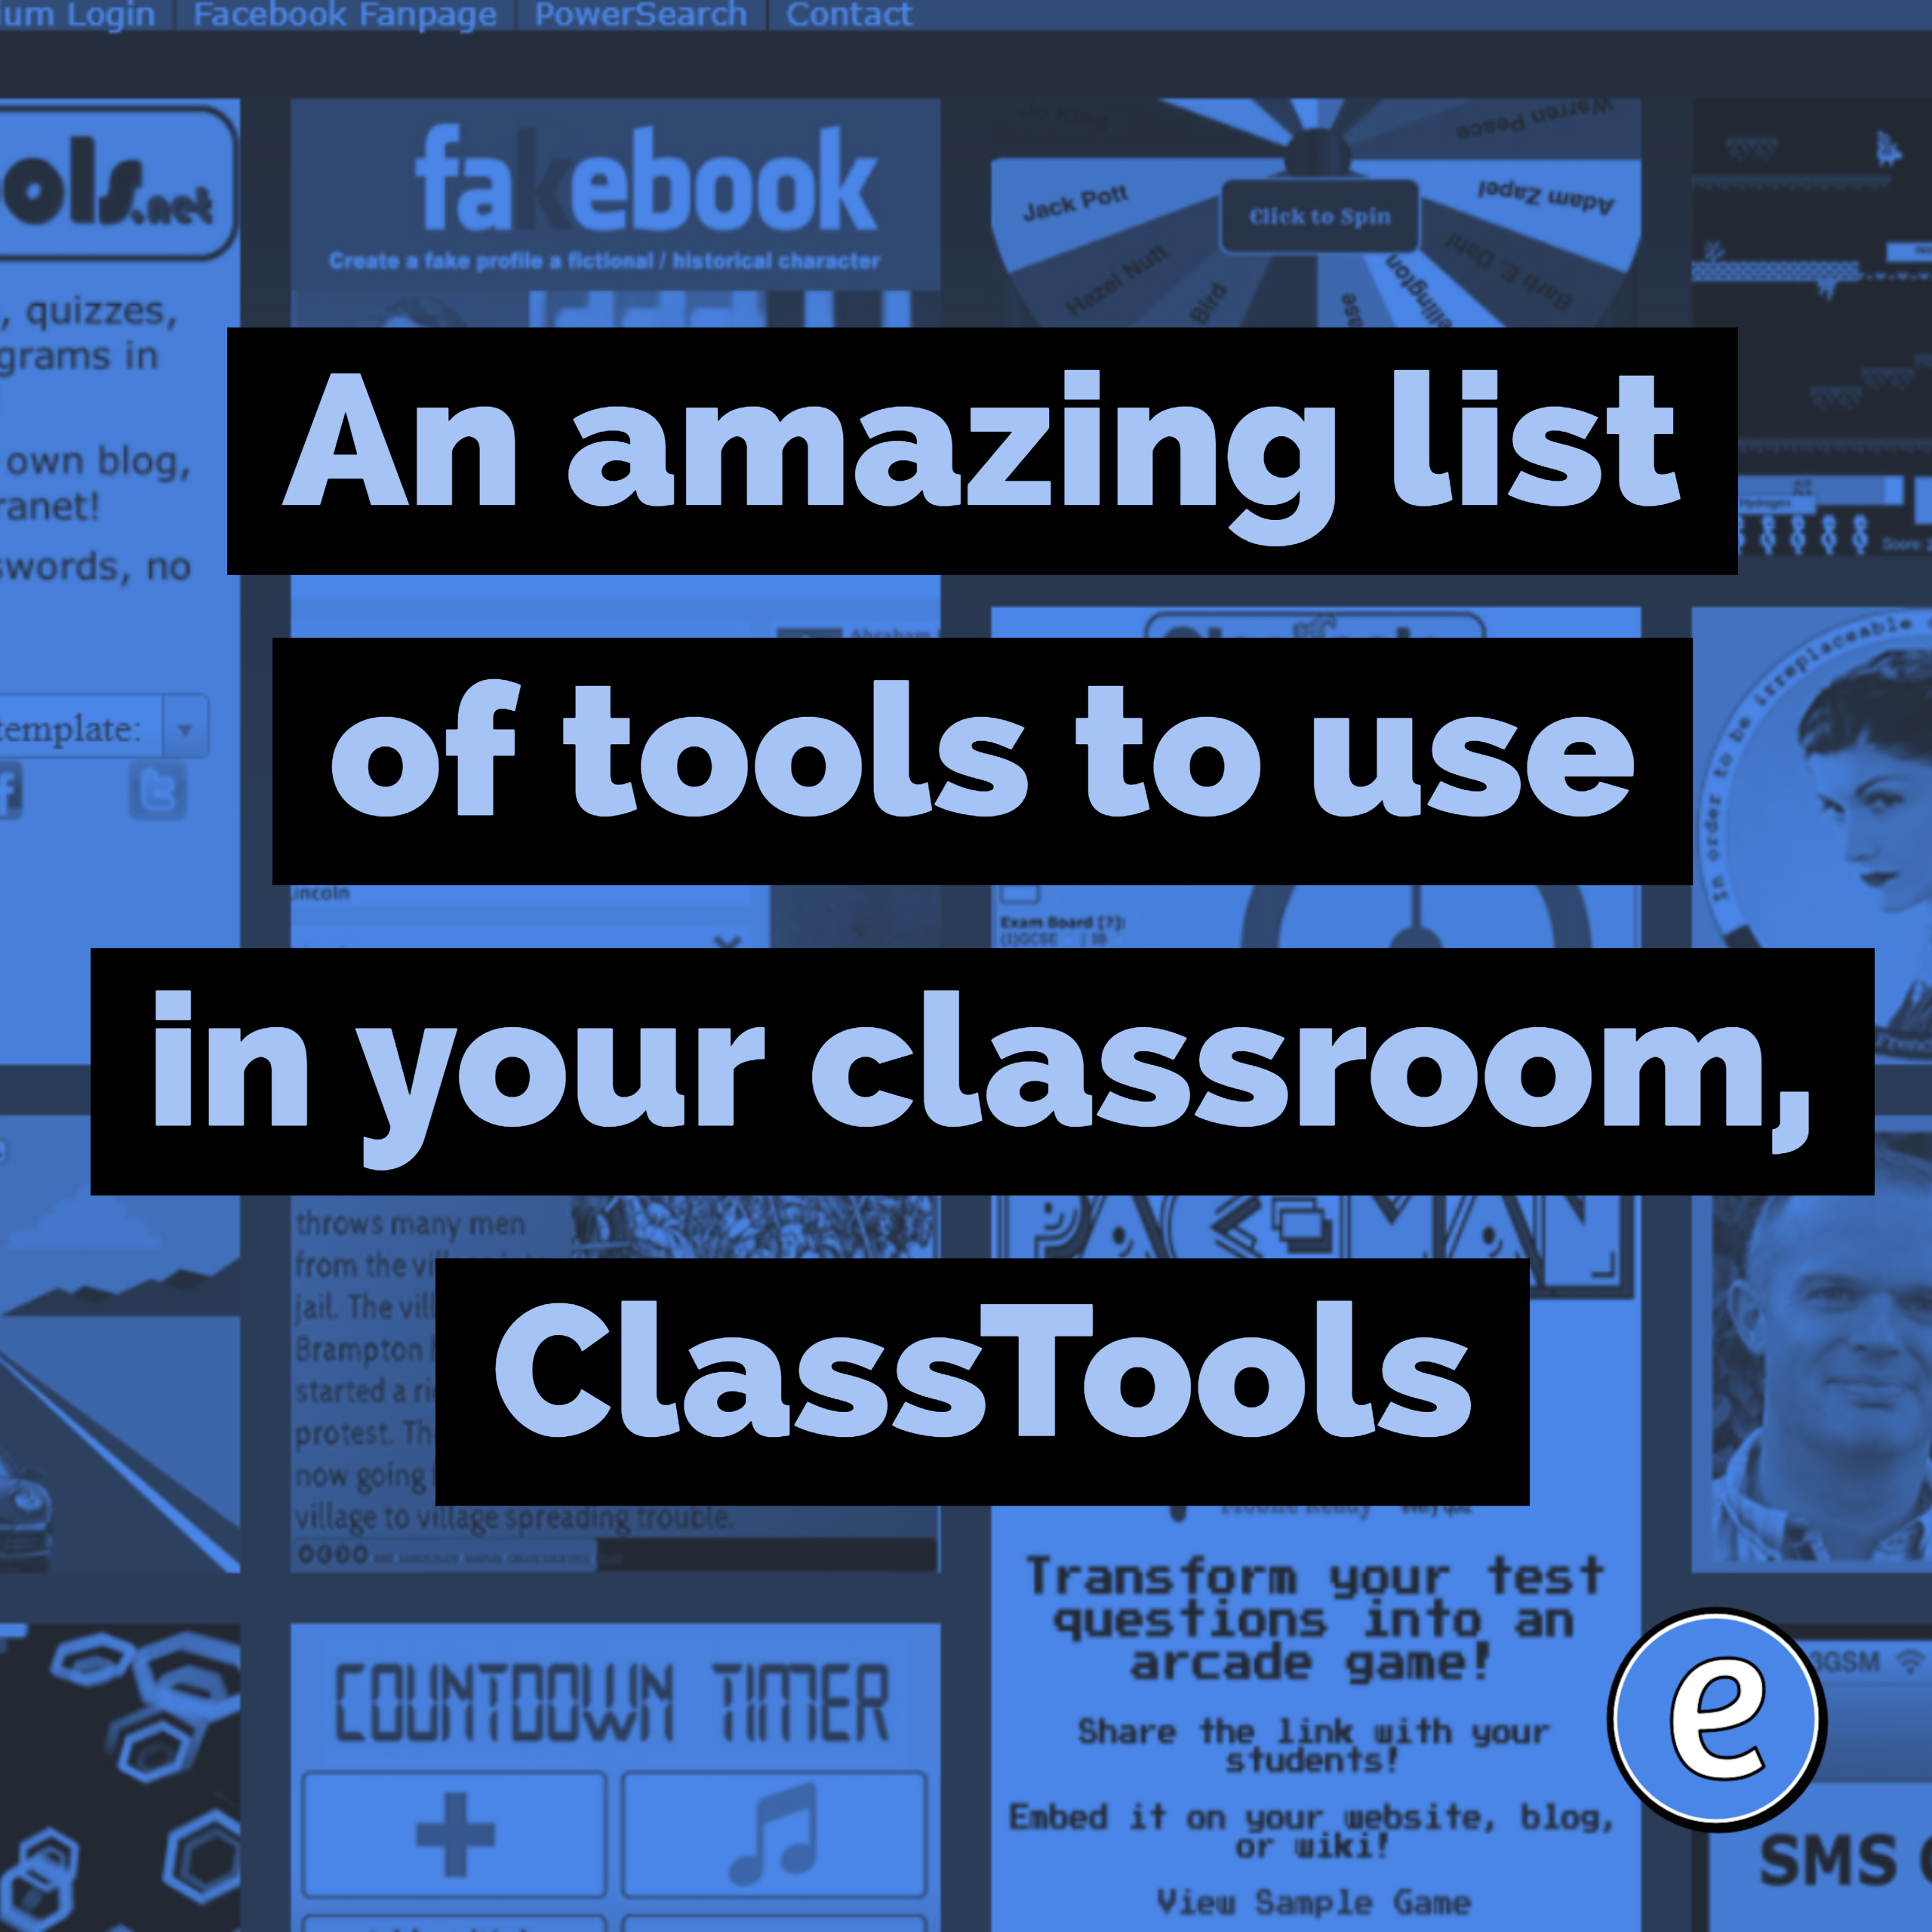 An amazing list of tools to use in your classroom, ClassTools